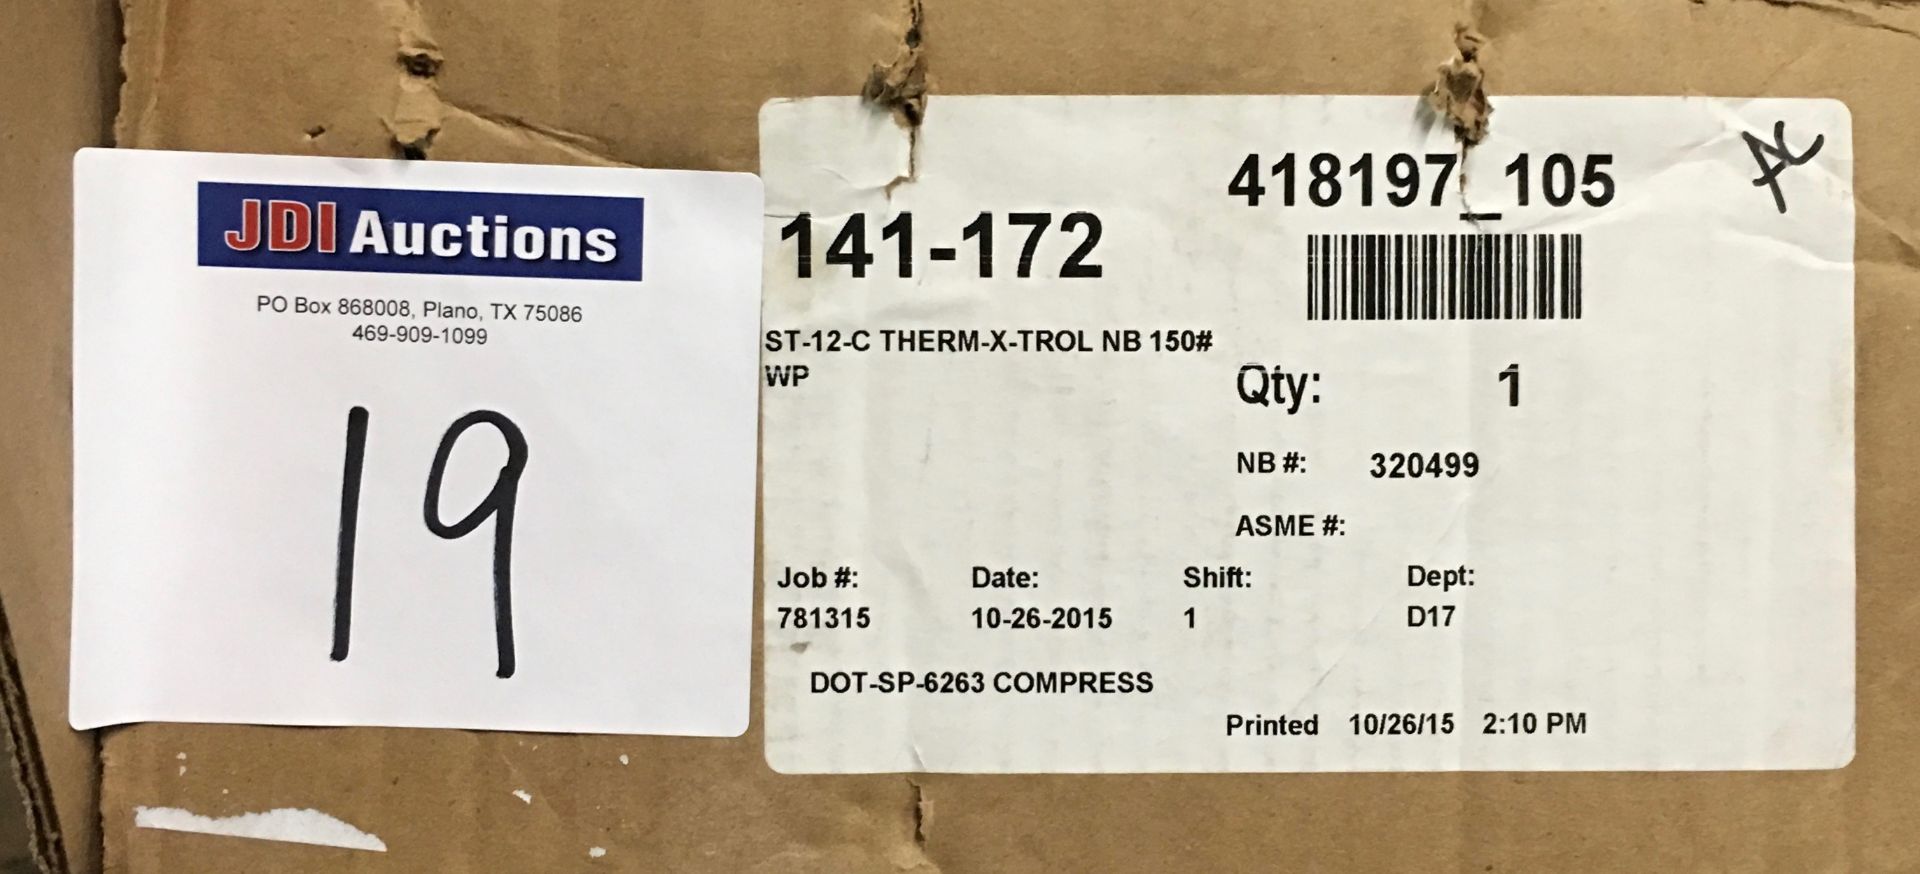 THERM-X-TROL Model ST-12C Thermal Expansion Tank - New, never used - Image 2 of 2